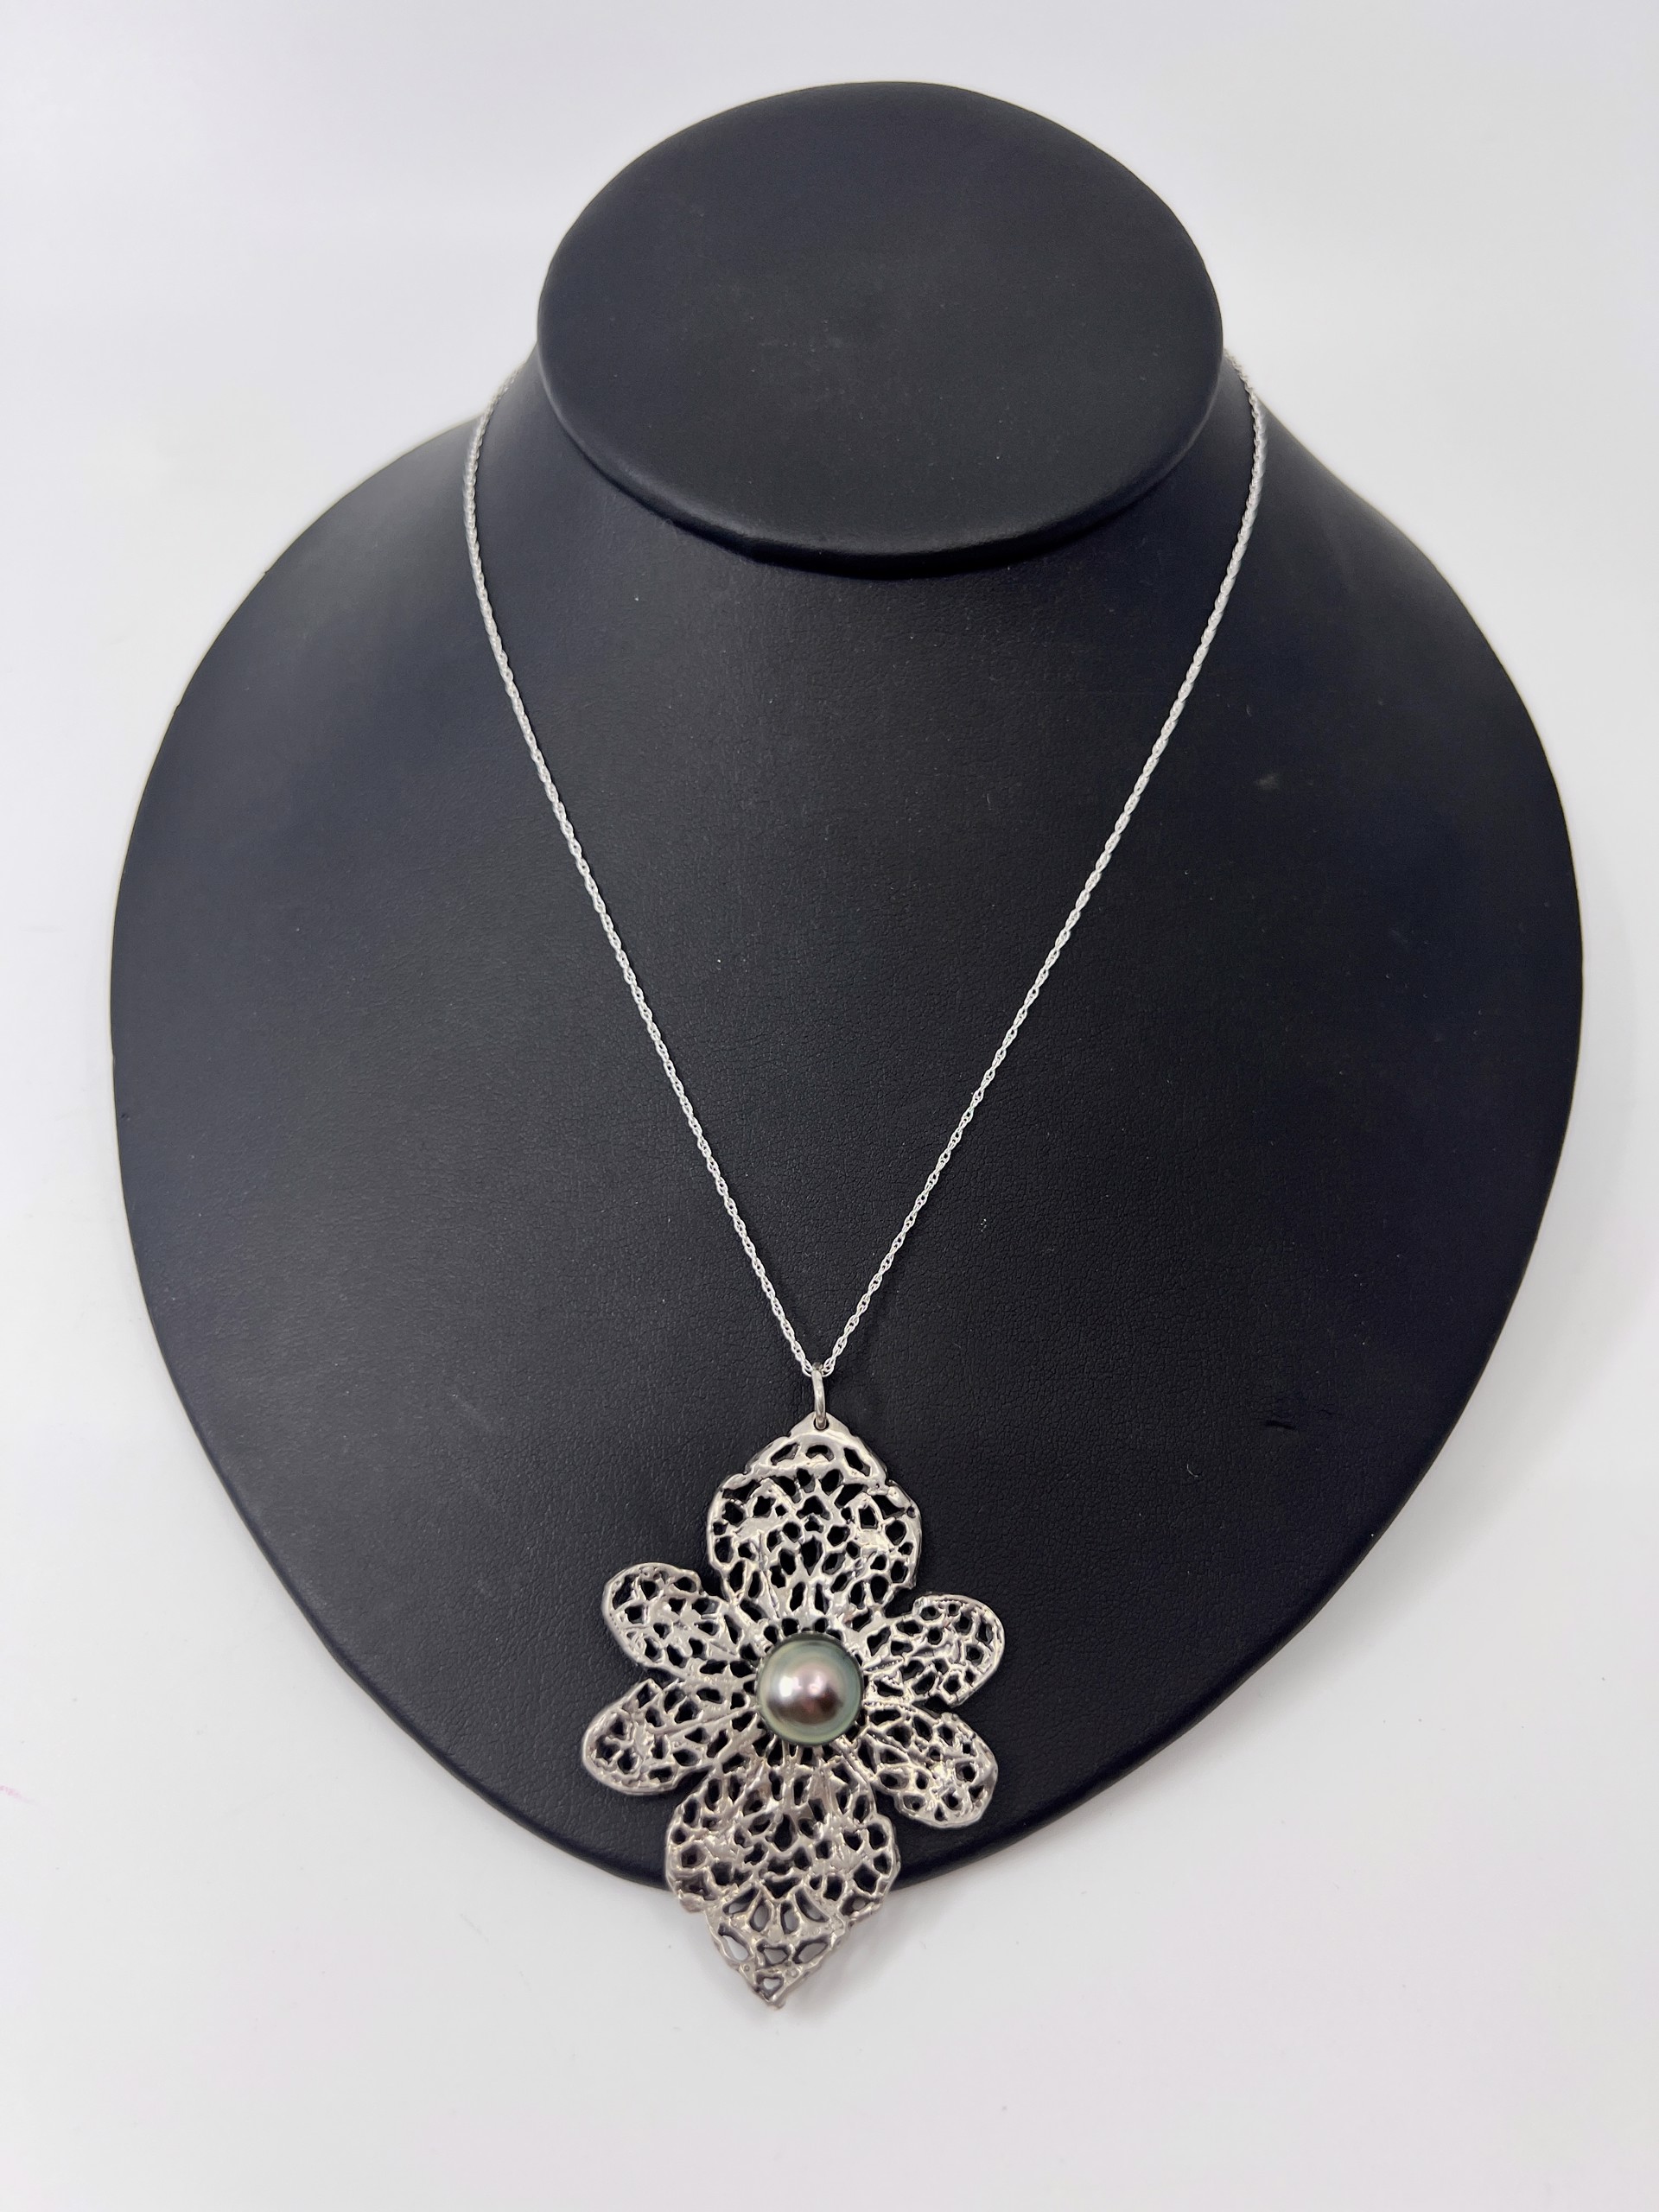 9600 Silver Lace Flower with Tahitian Pearl by Beth Benowich